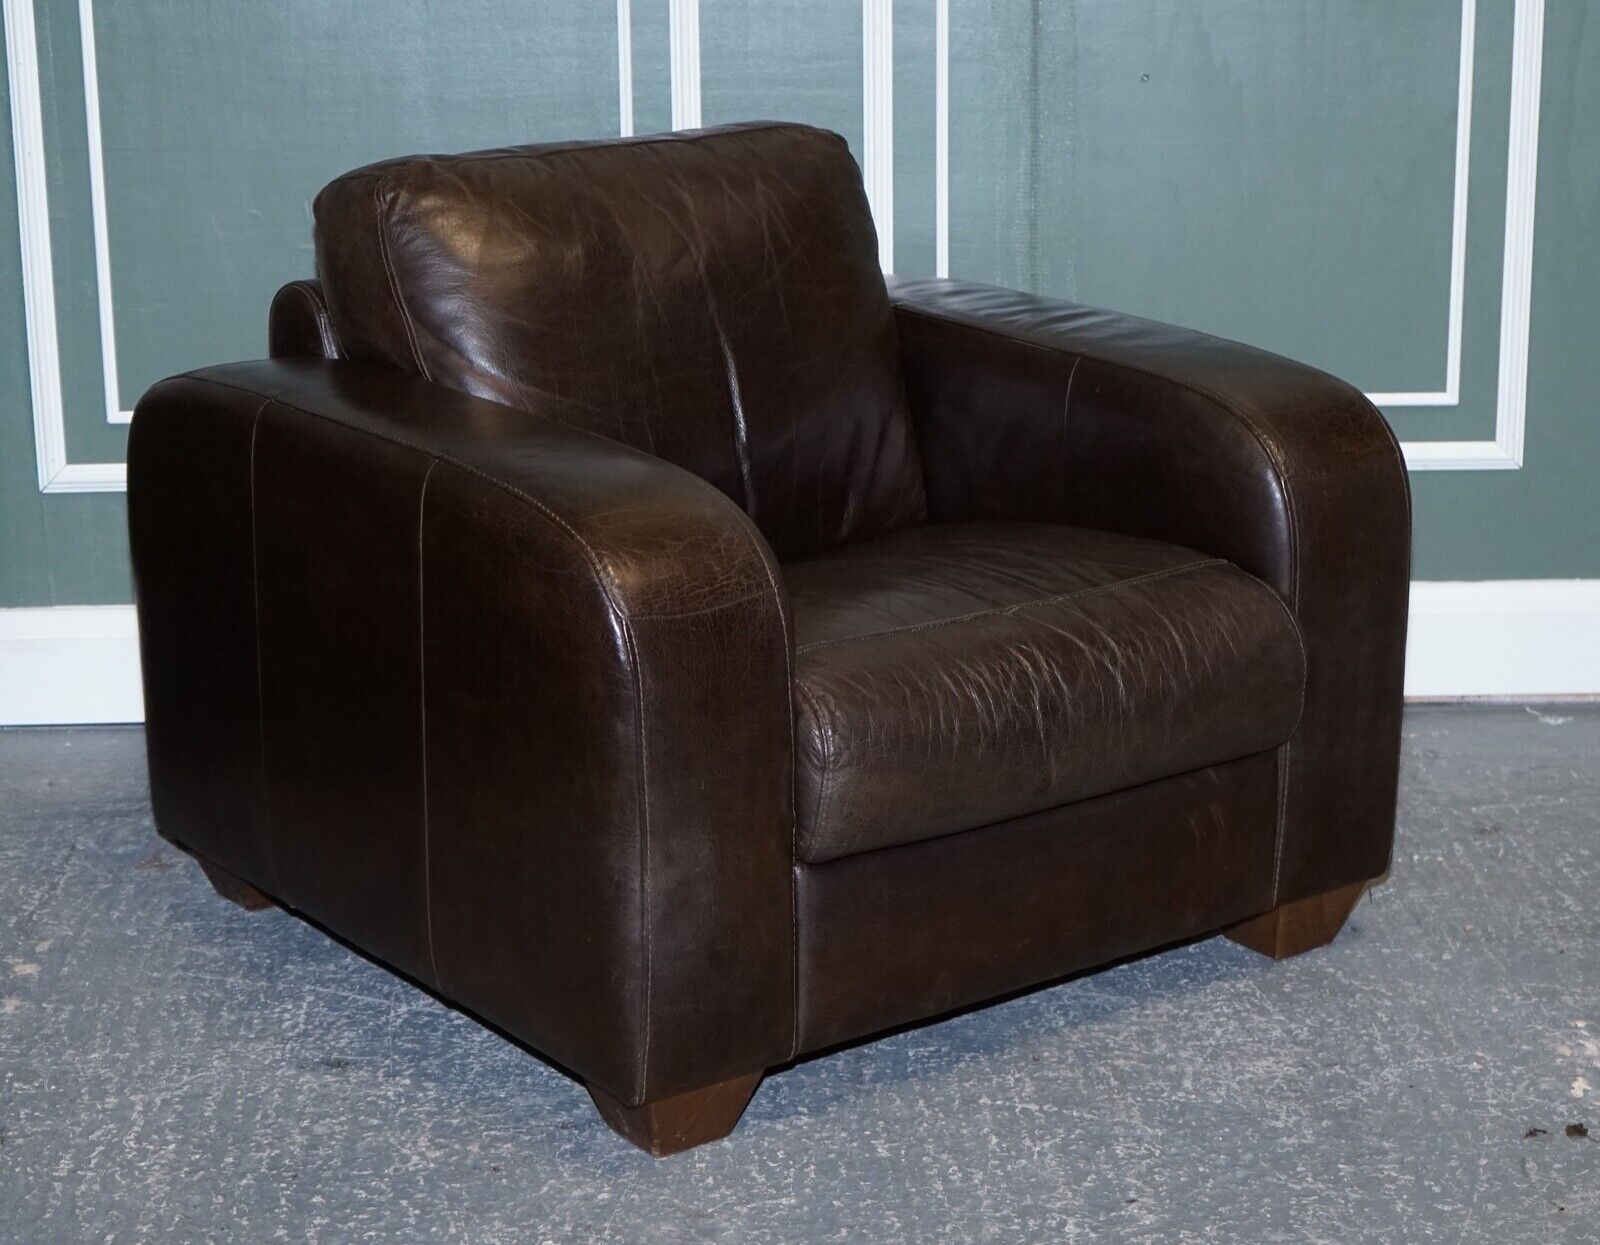 VINTAGE PAIR OF CHOCOLATE BROWN LEATHER ARMCHAIRS BY SOFITALIA